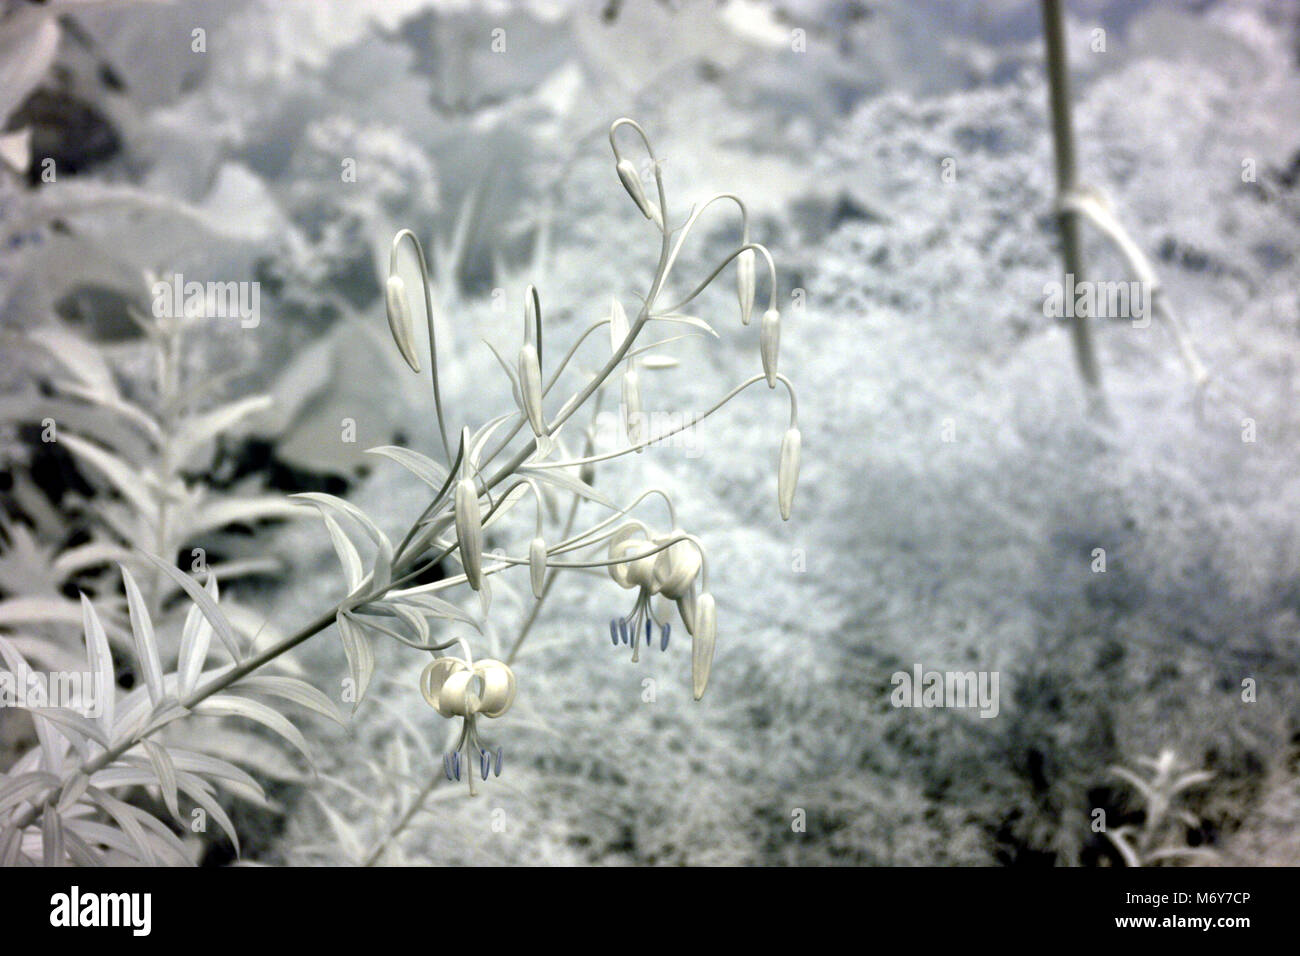 Infrared image of long stem plant with buds and flowers in a garden setting Stock Photo